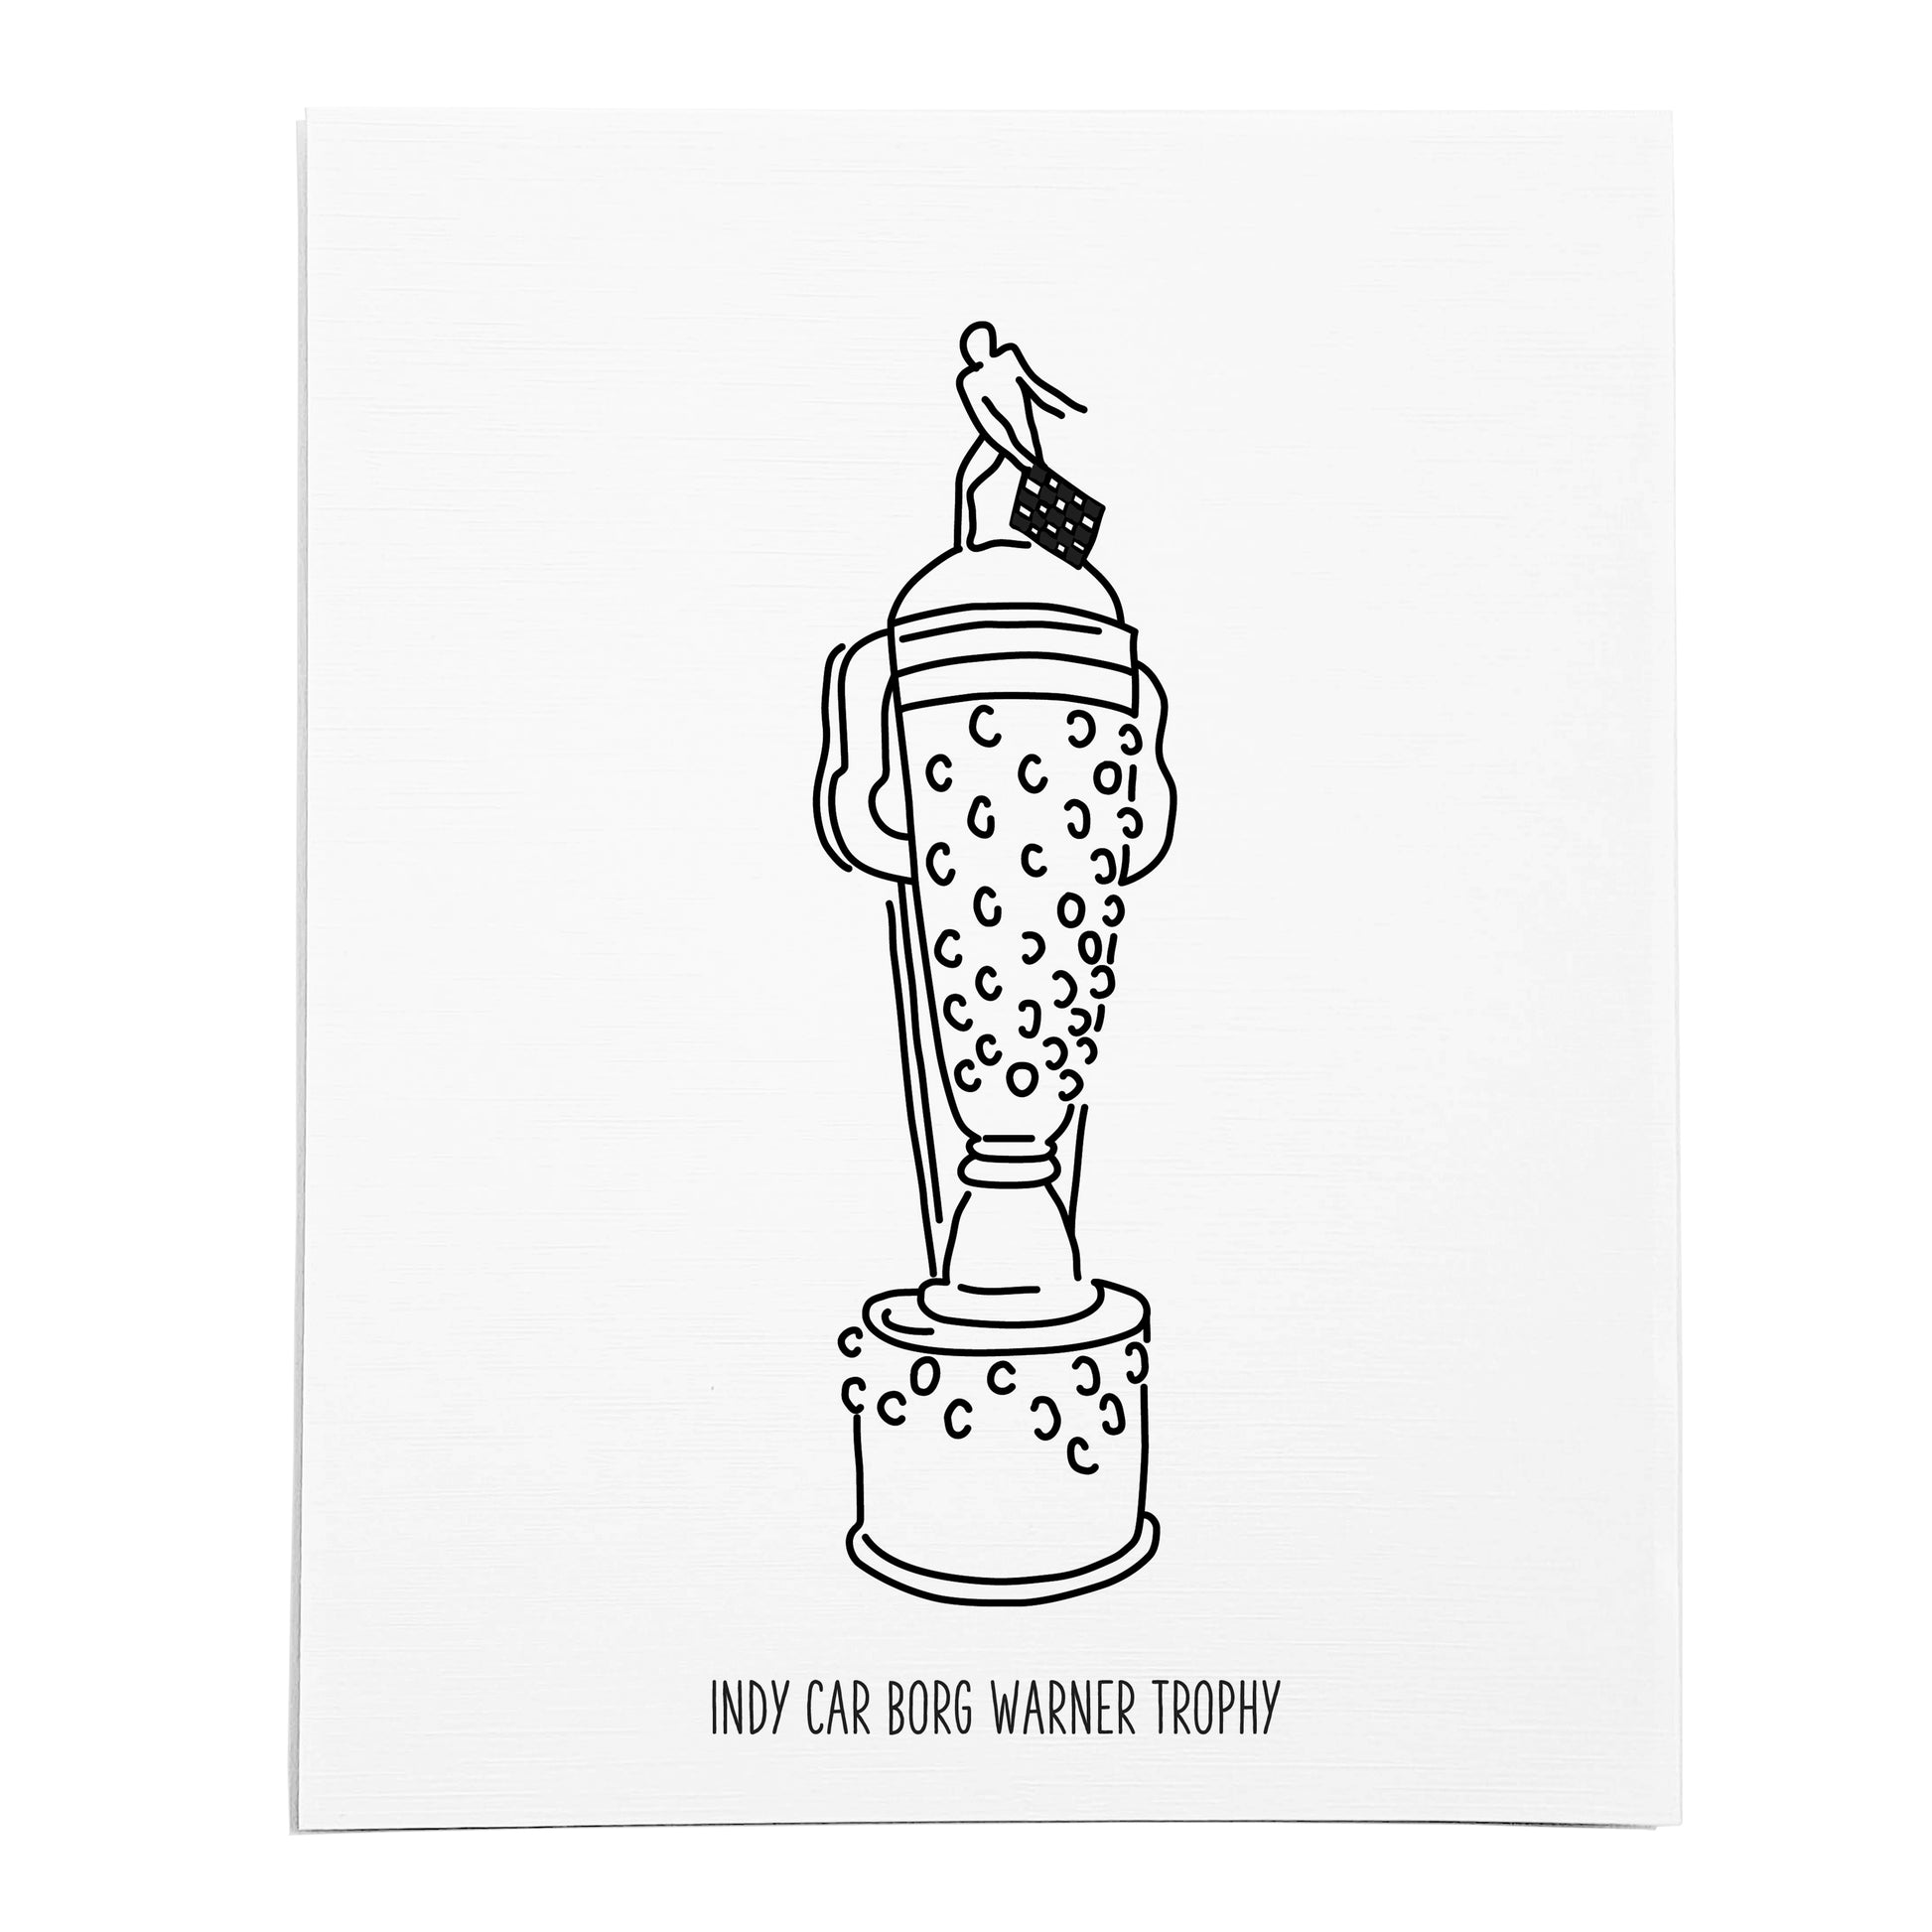 An art print featuring a line drawing of the Indy Car Borg Warner Trophy on white linen paper